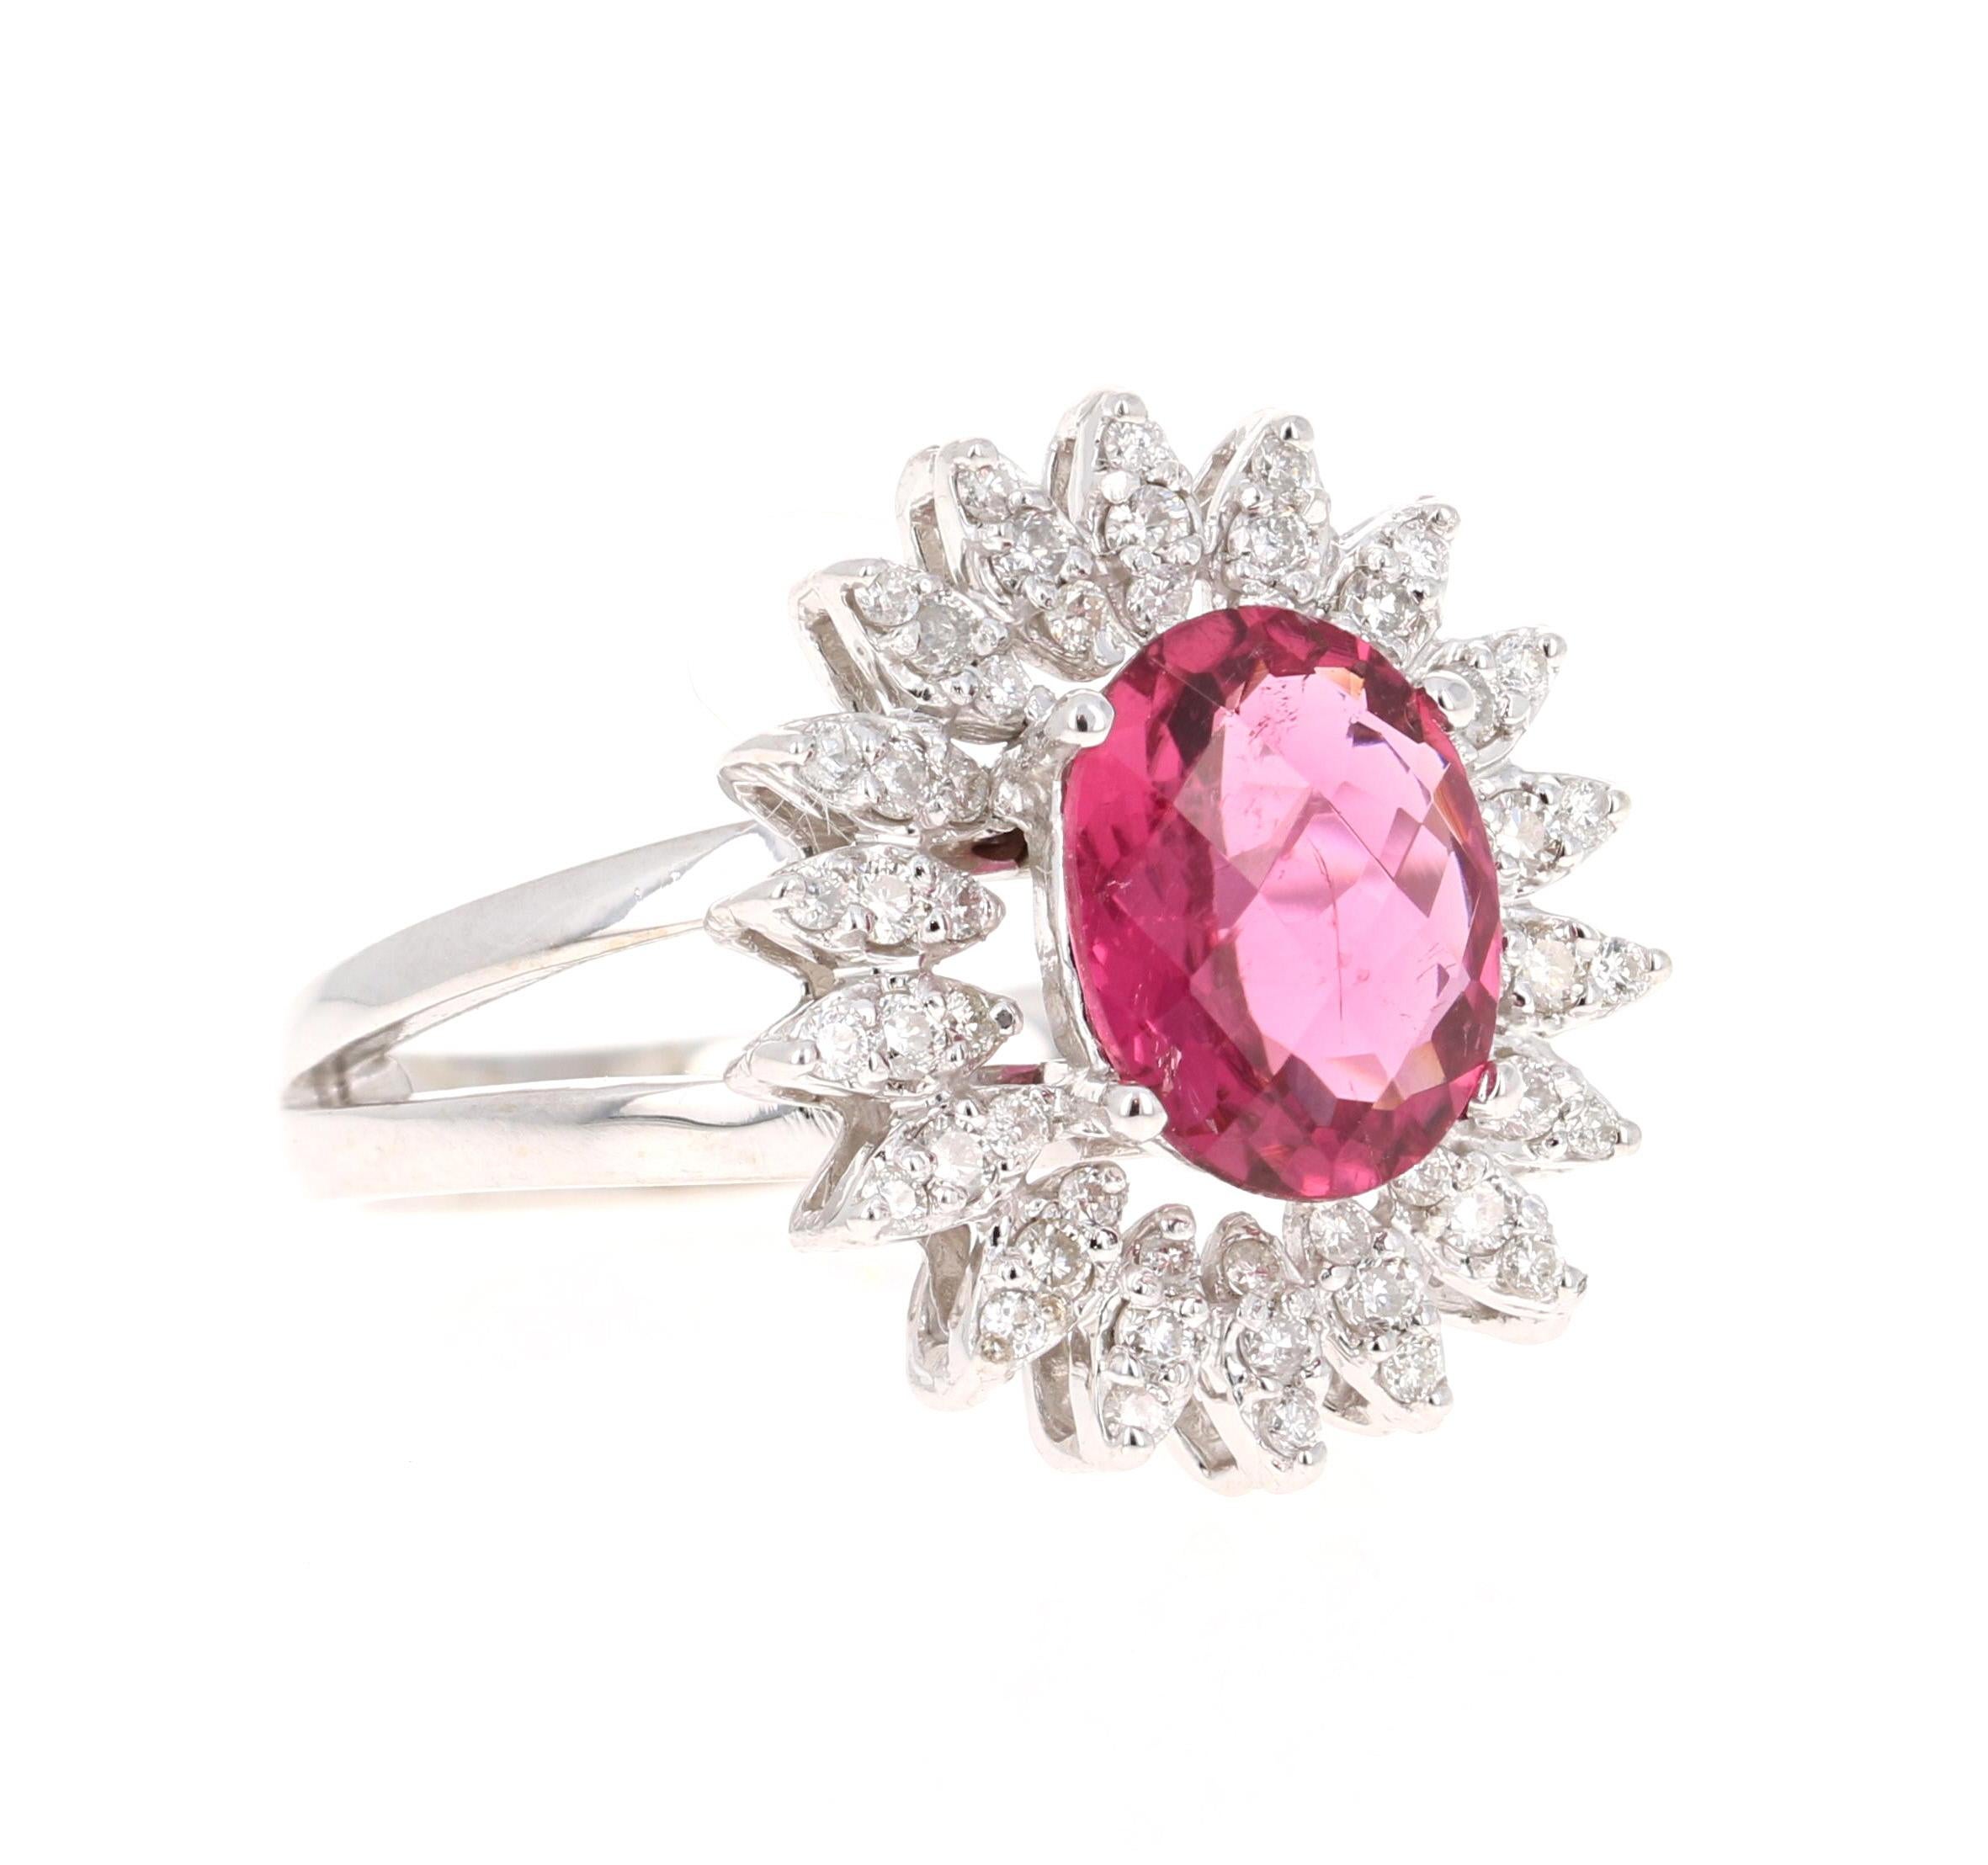 This ring has an Oval Cut Pink Tourmaline that weighs 2.05 Carats. Floating around the Tourmaline are 54 Round Cut Diamonds weighing 0.60 Carats.  The total carat weight of the ring is 2.65 Carats. The measurements of the Tourmaline are 8mm x 10mm.